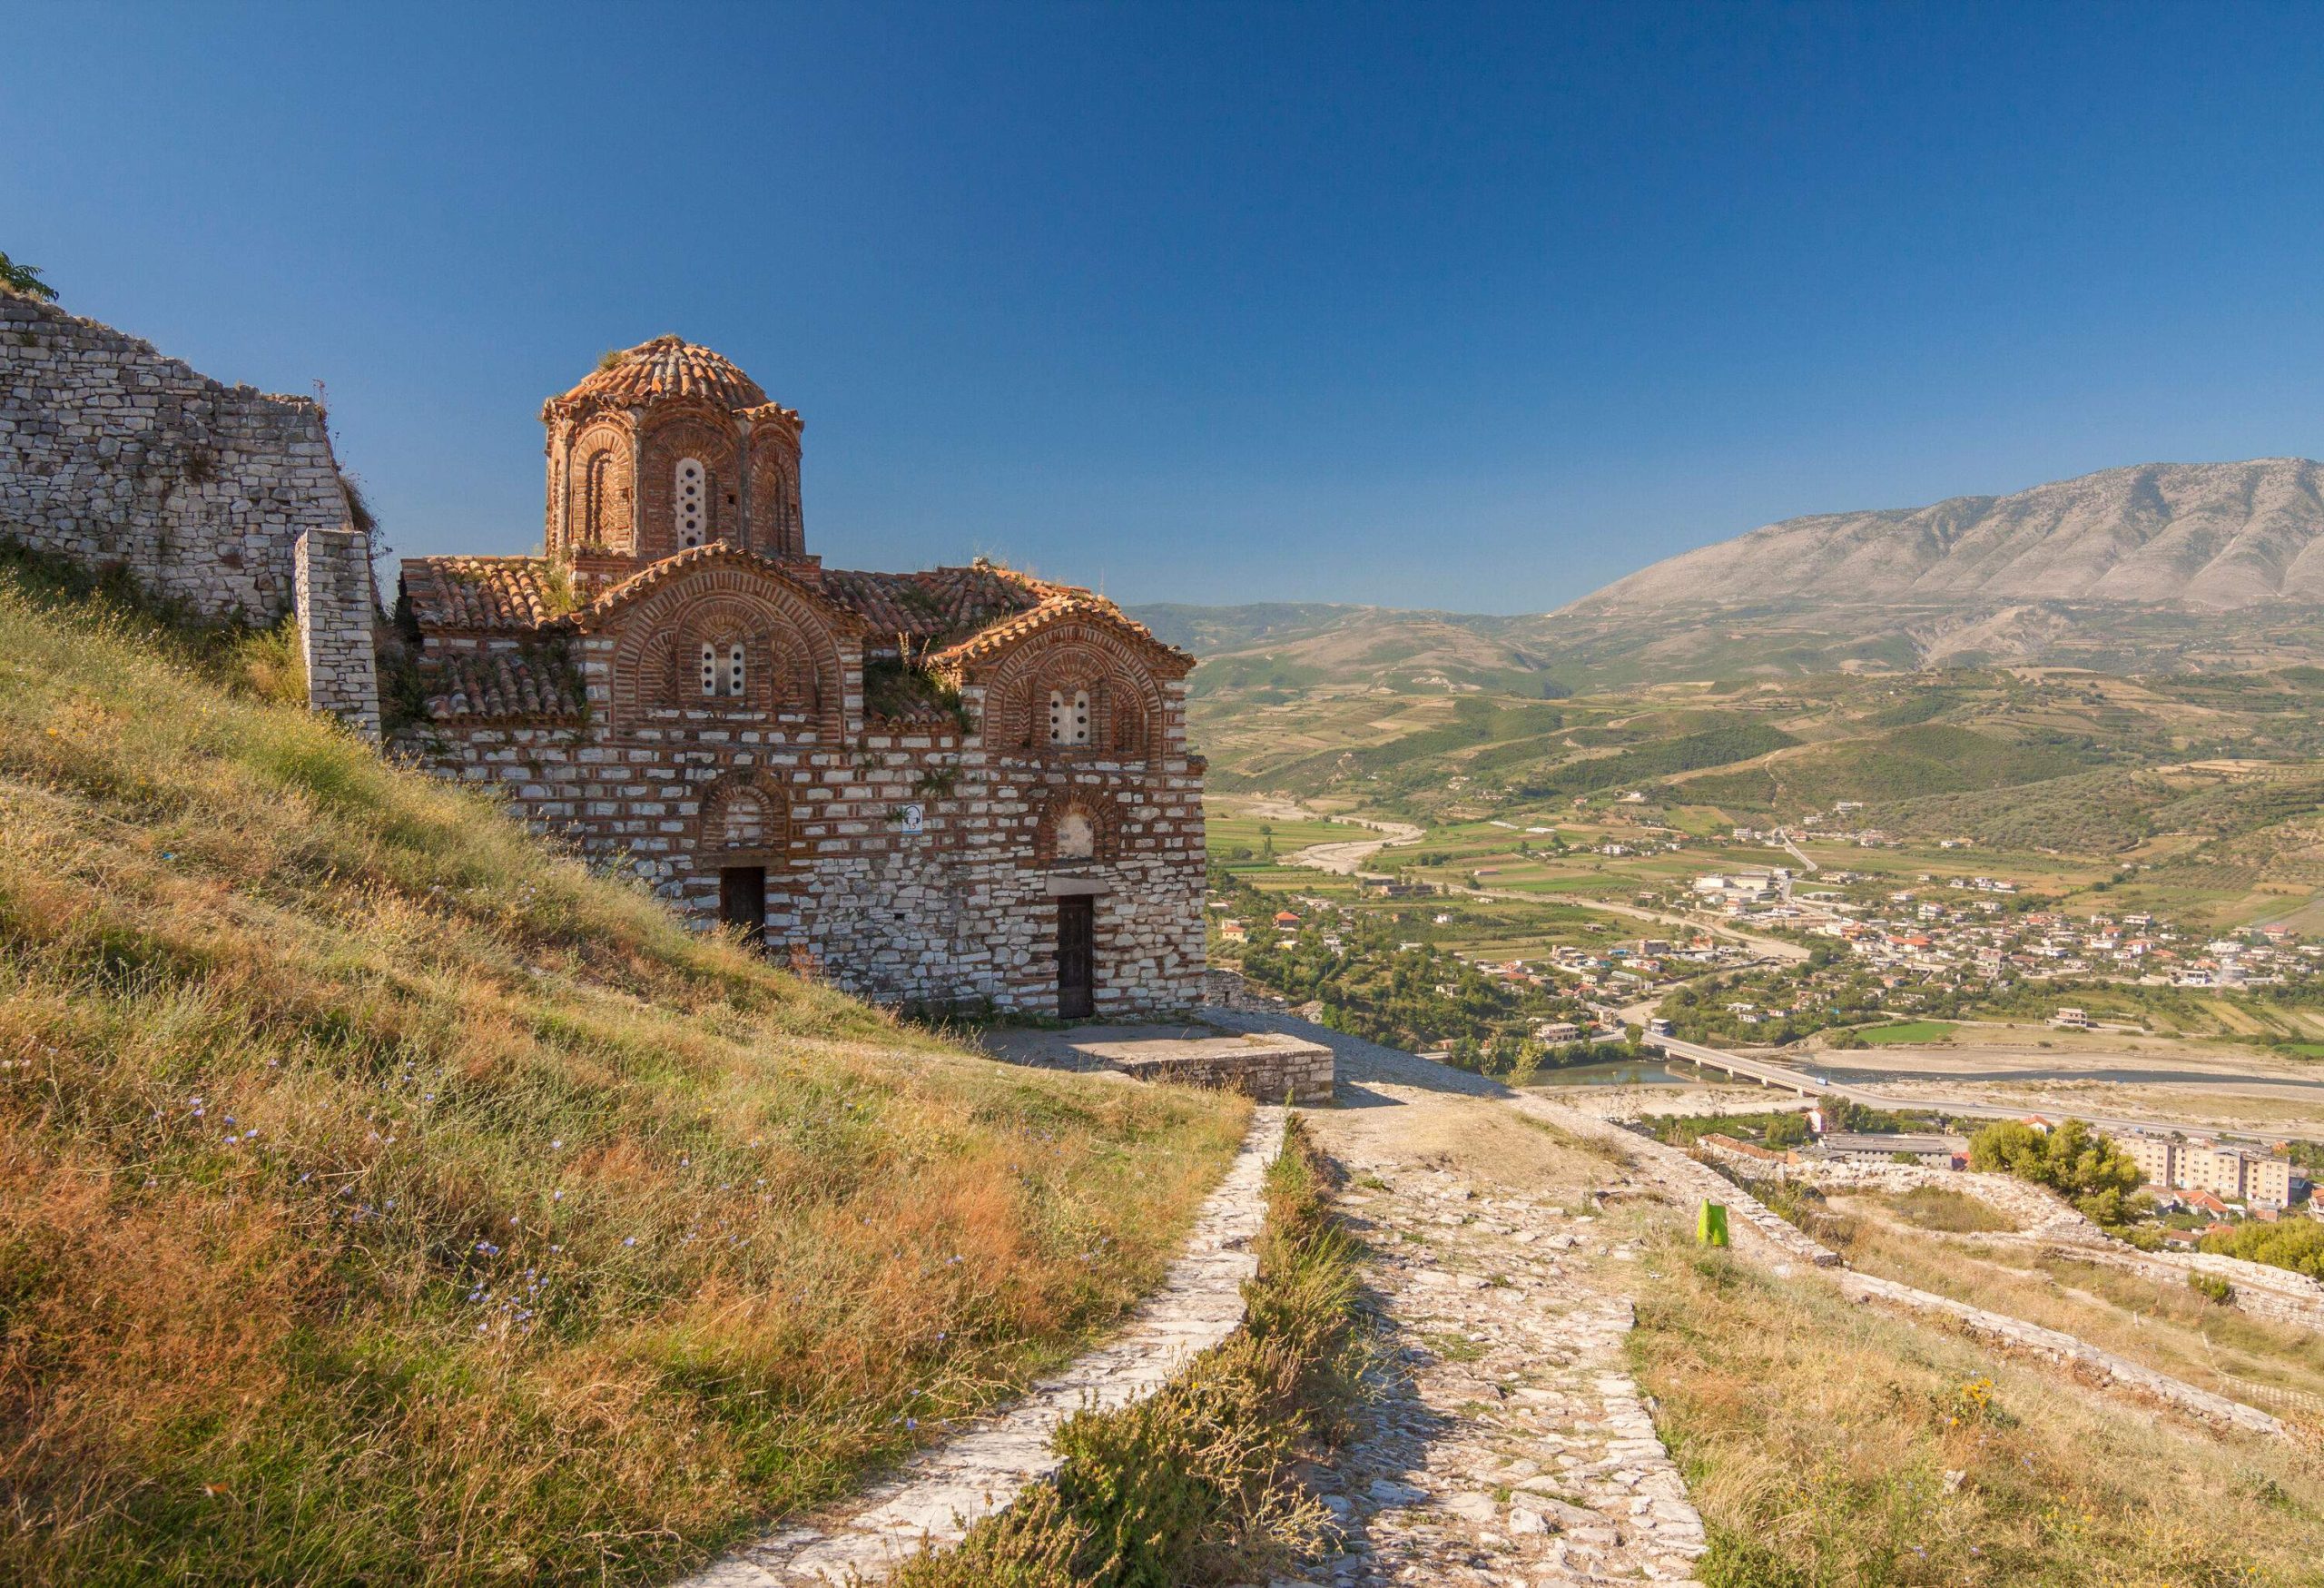 A stone church with dome roof perched on a grassy hillside and overlooking views of a town.